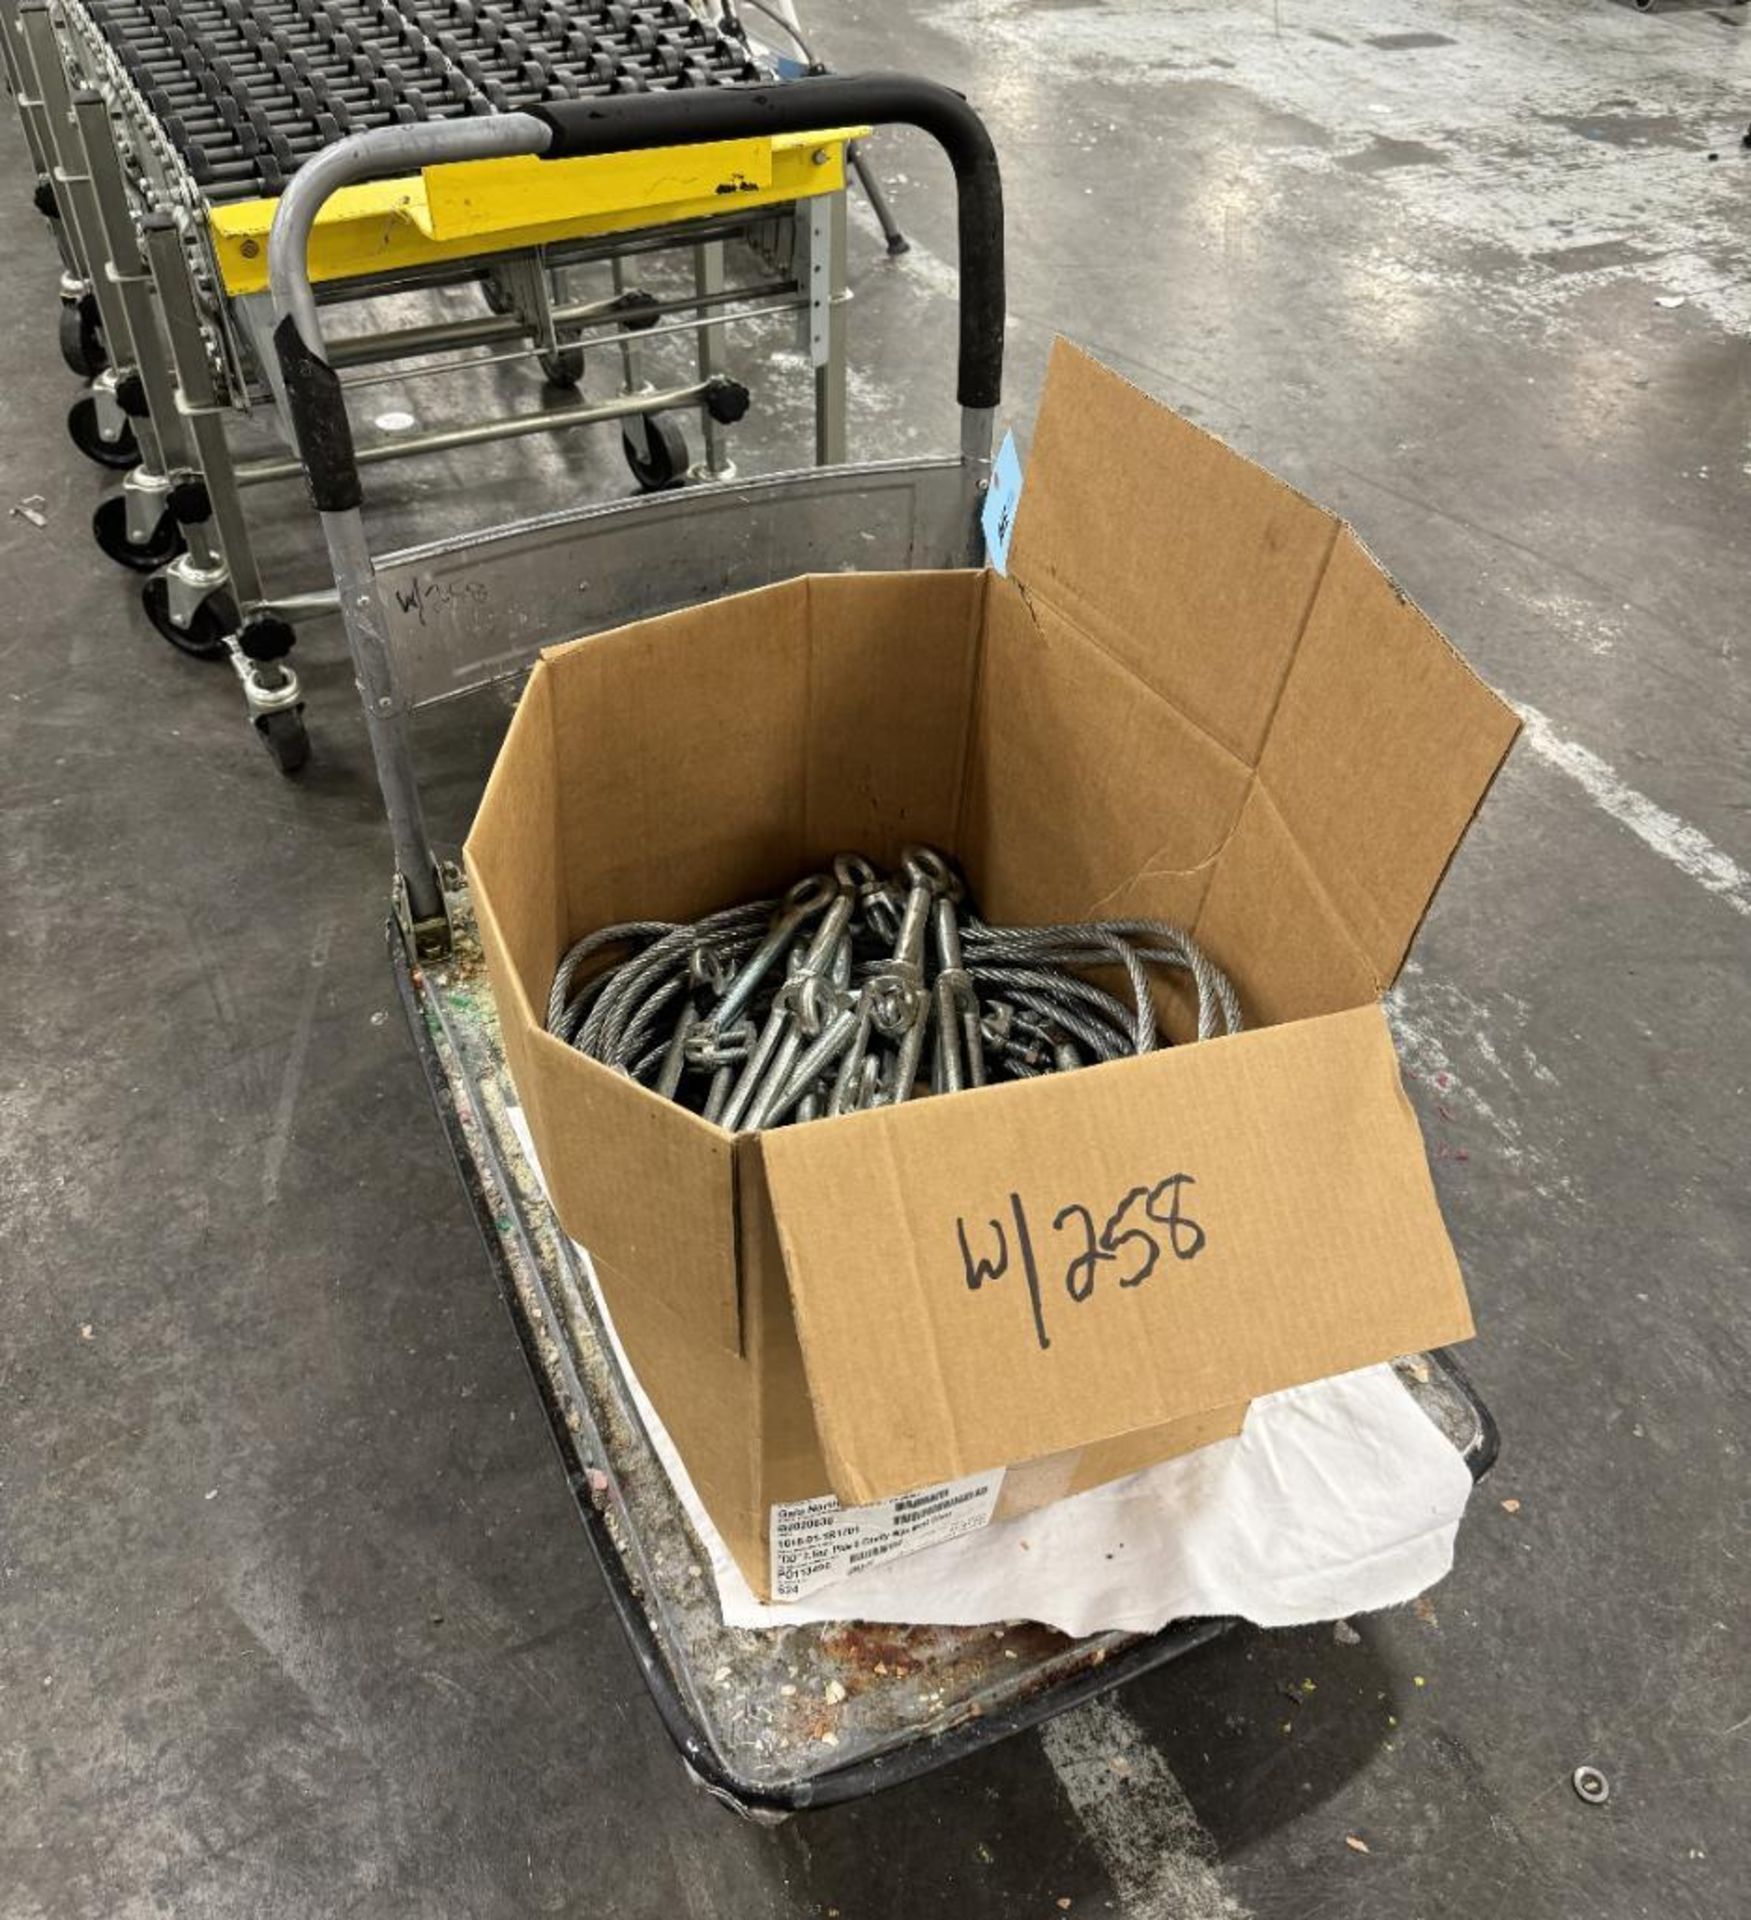 Lot Consisting Of: (1) Cart, (1) Box Of Turnbuckles & Wire Cable. - Image 2 of 4